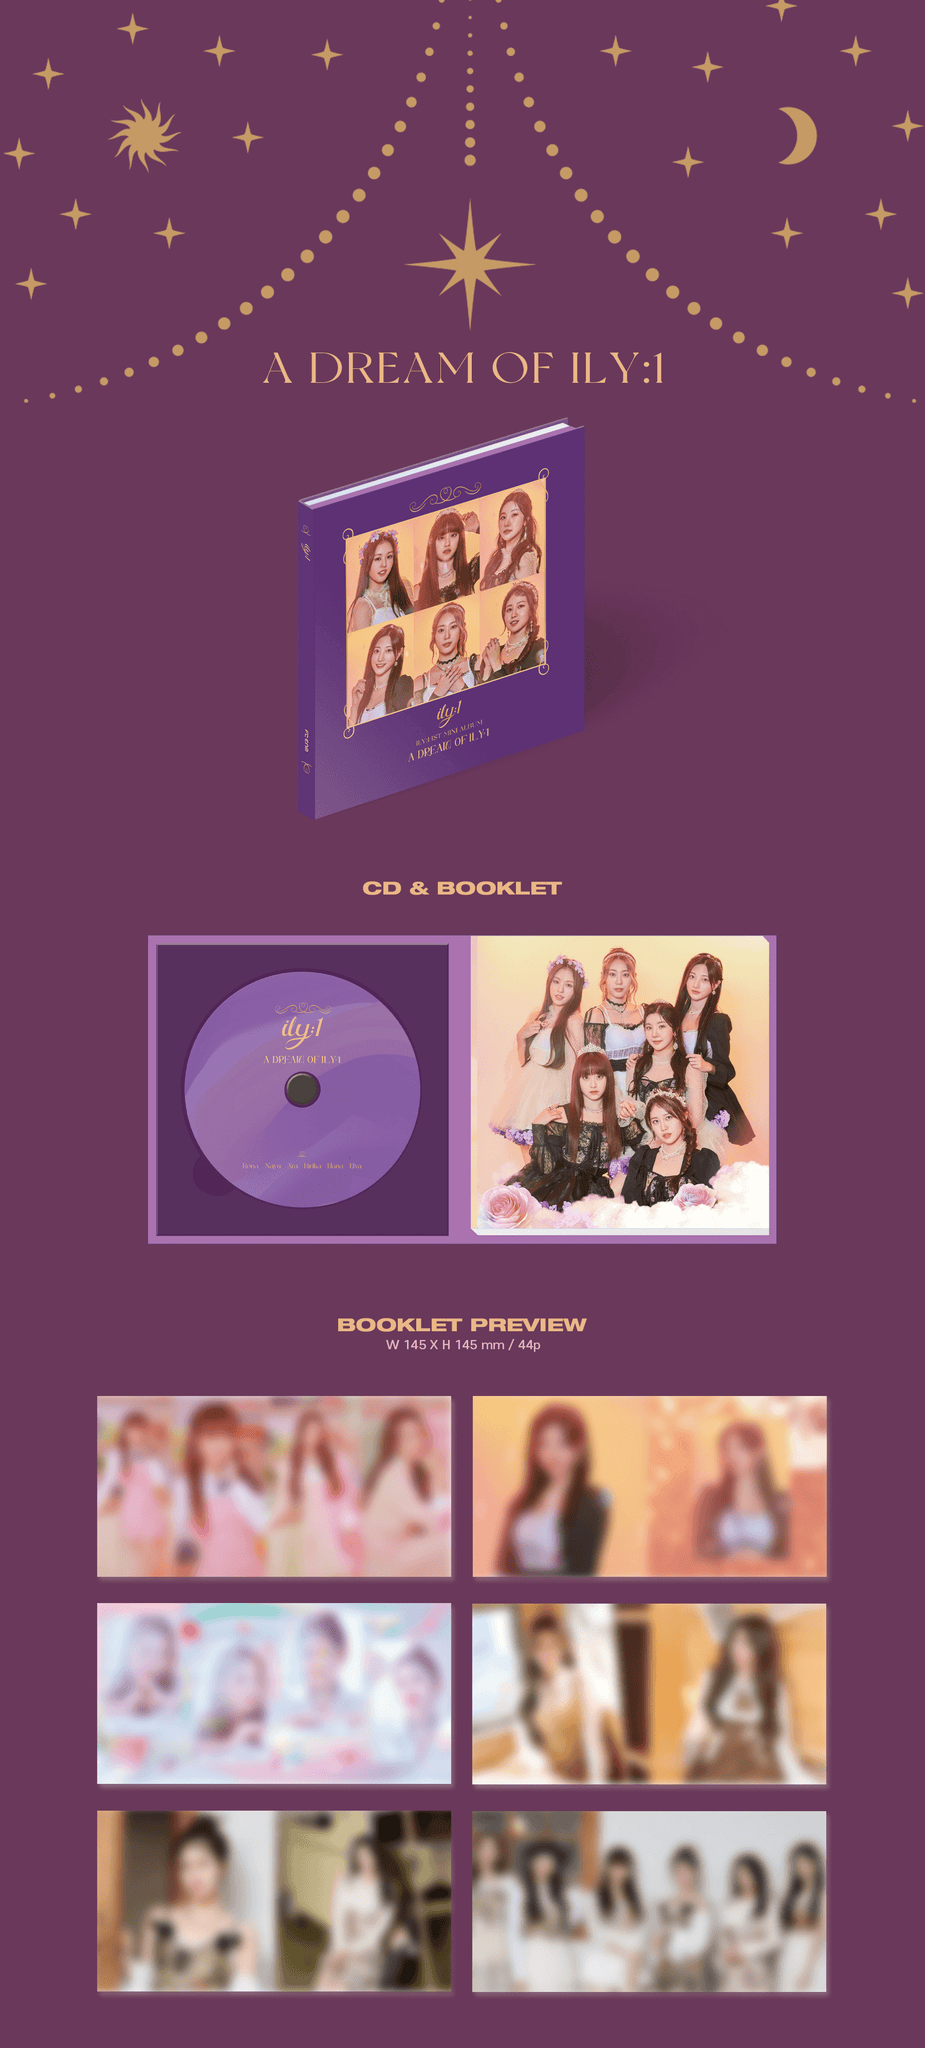 ILY:1 A Dream of ILY:1 Inclusions CD Booklet Booklet Preview